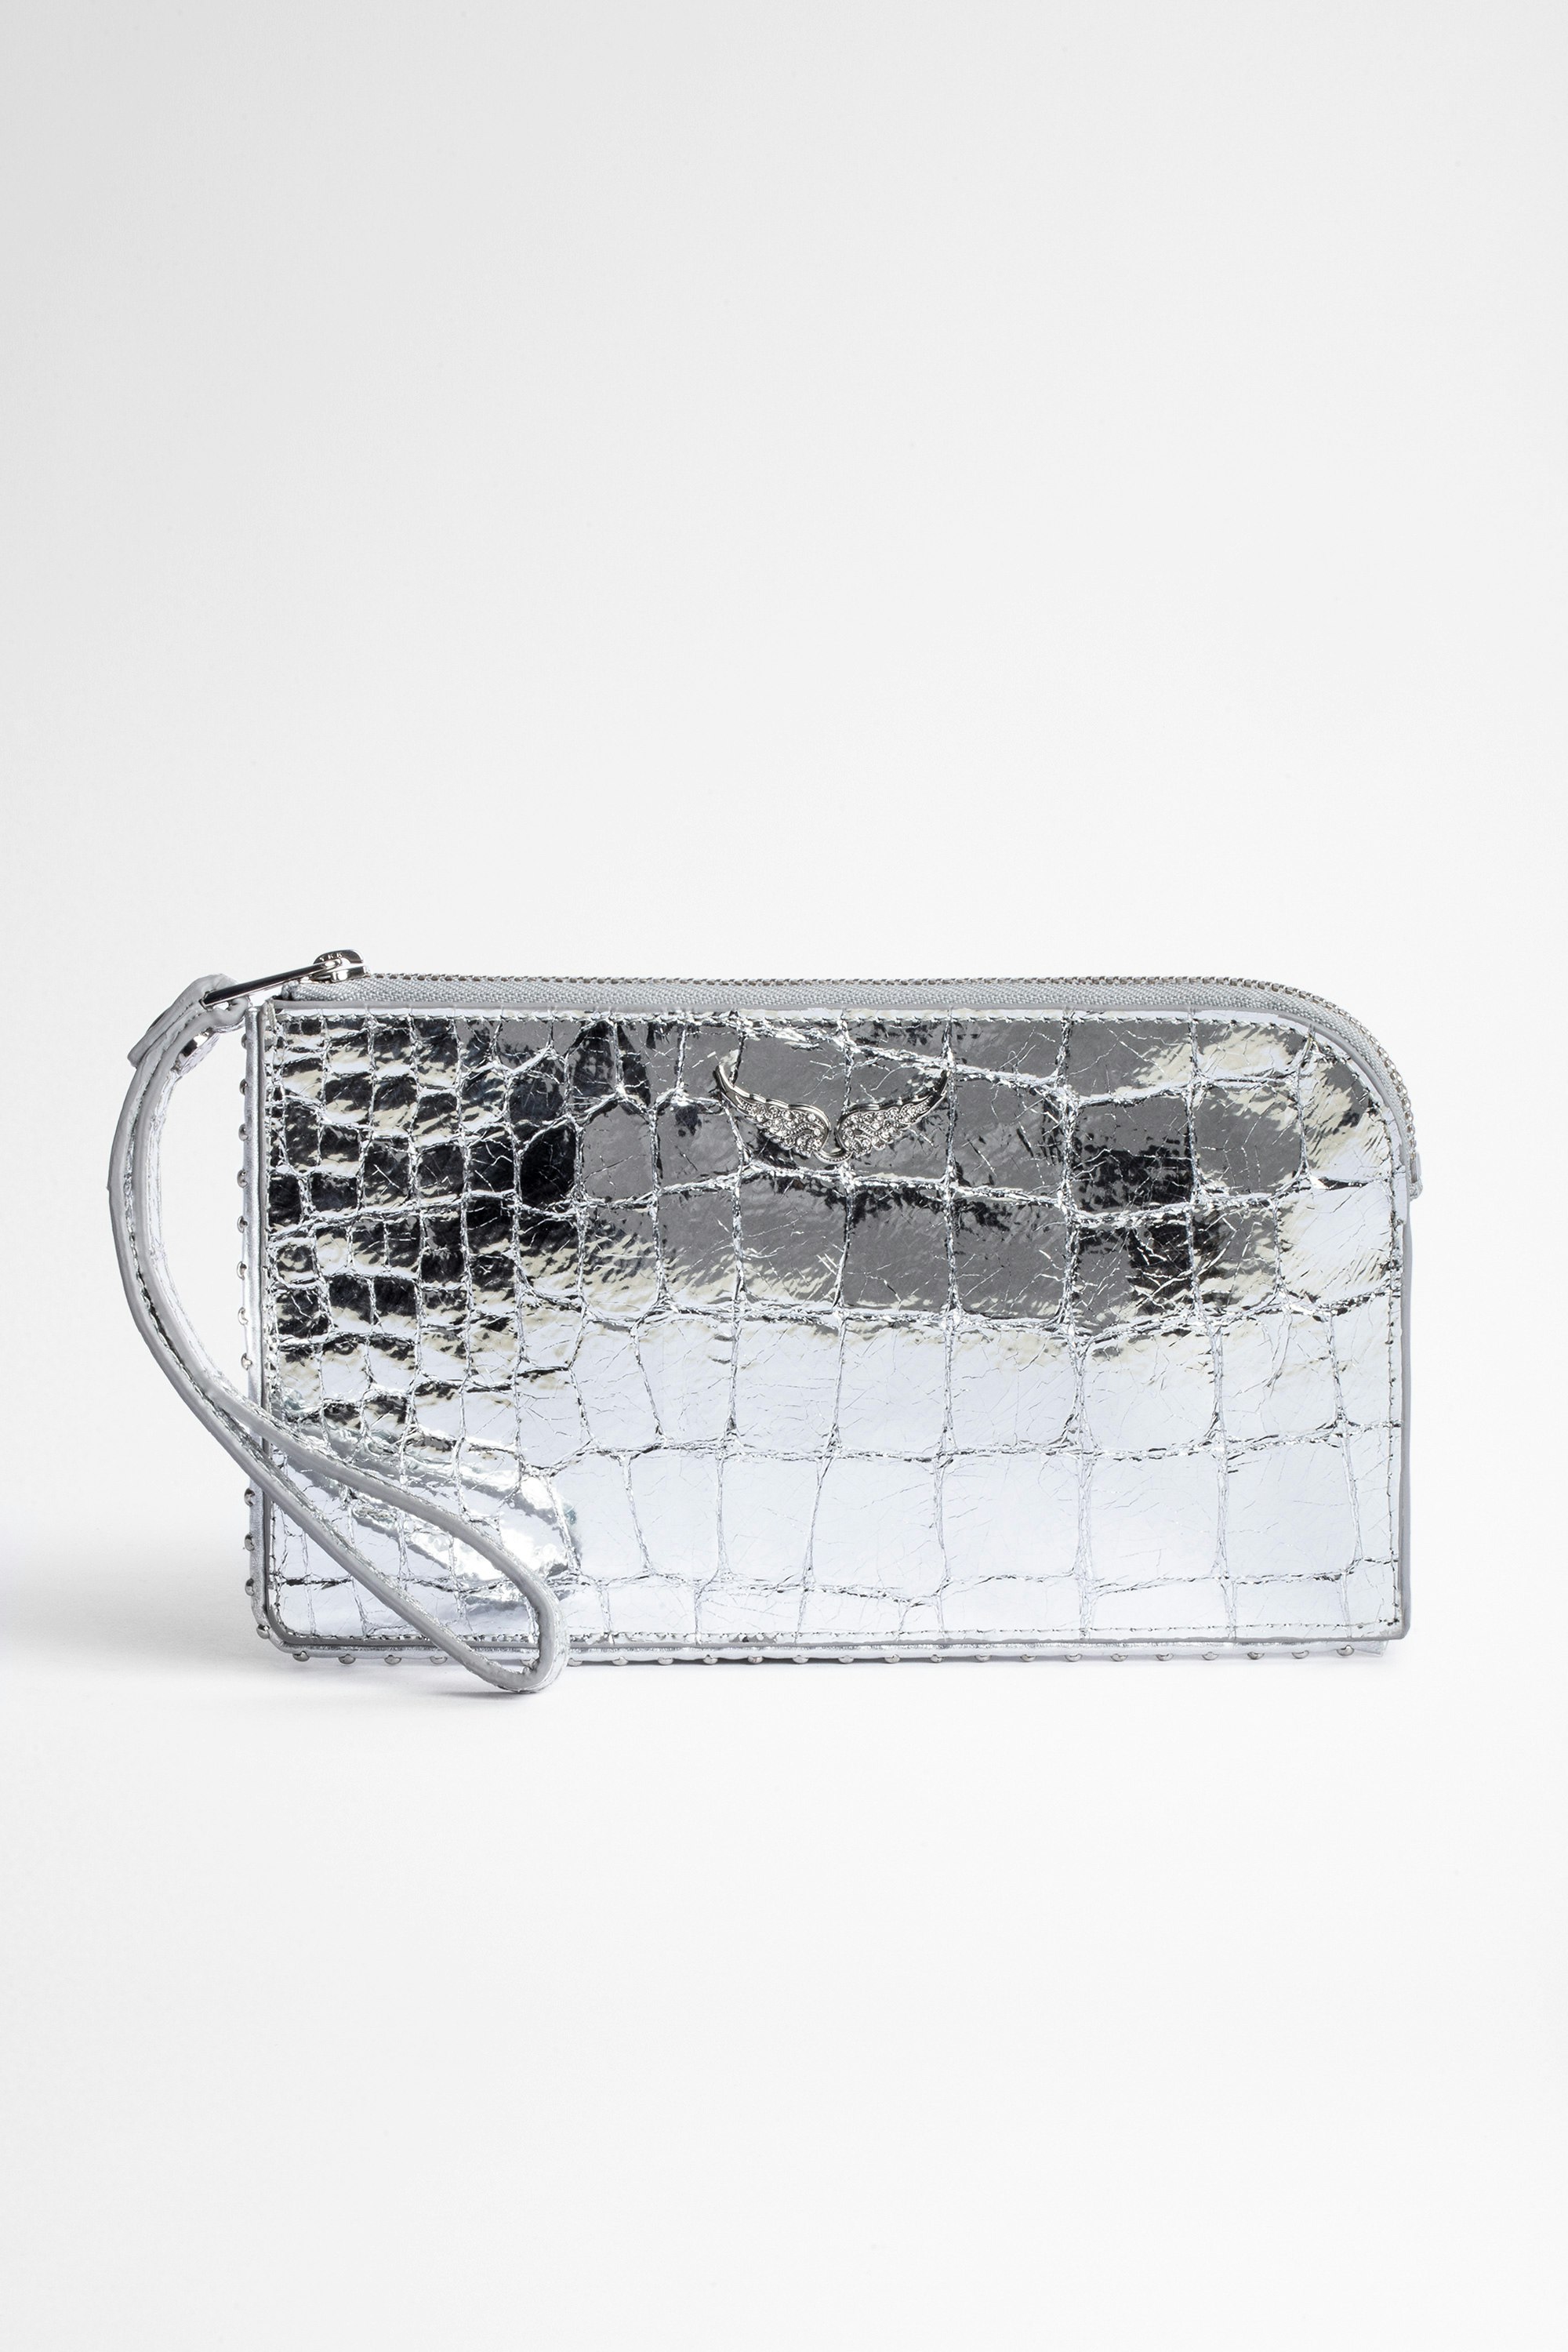 Embossed Phone Wallet Phone pouch in silver leather embossed with a crocodile pattern